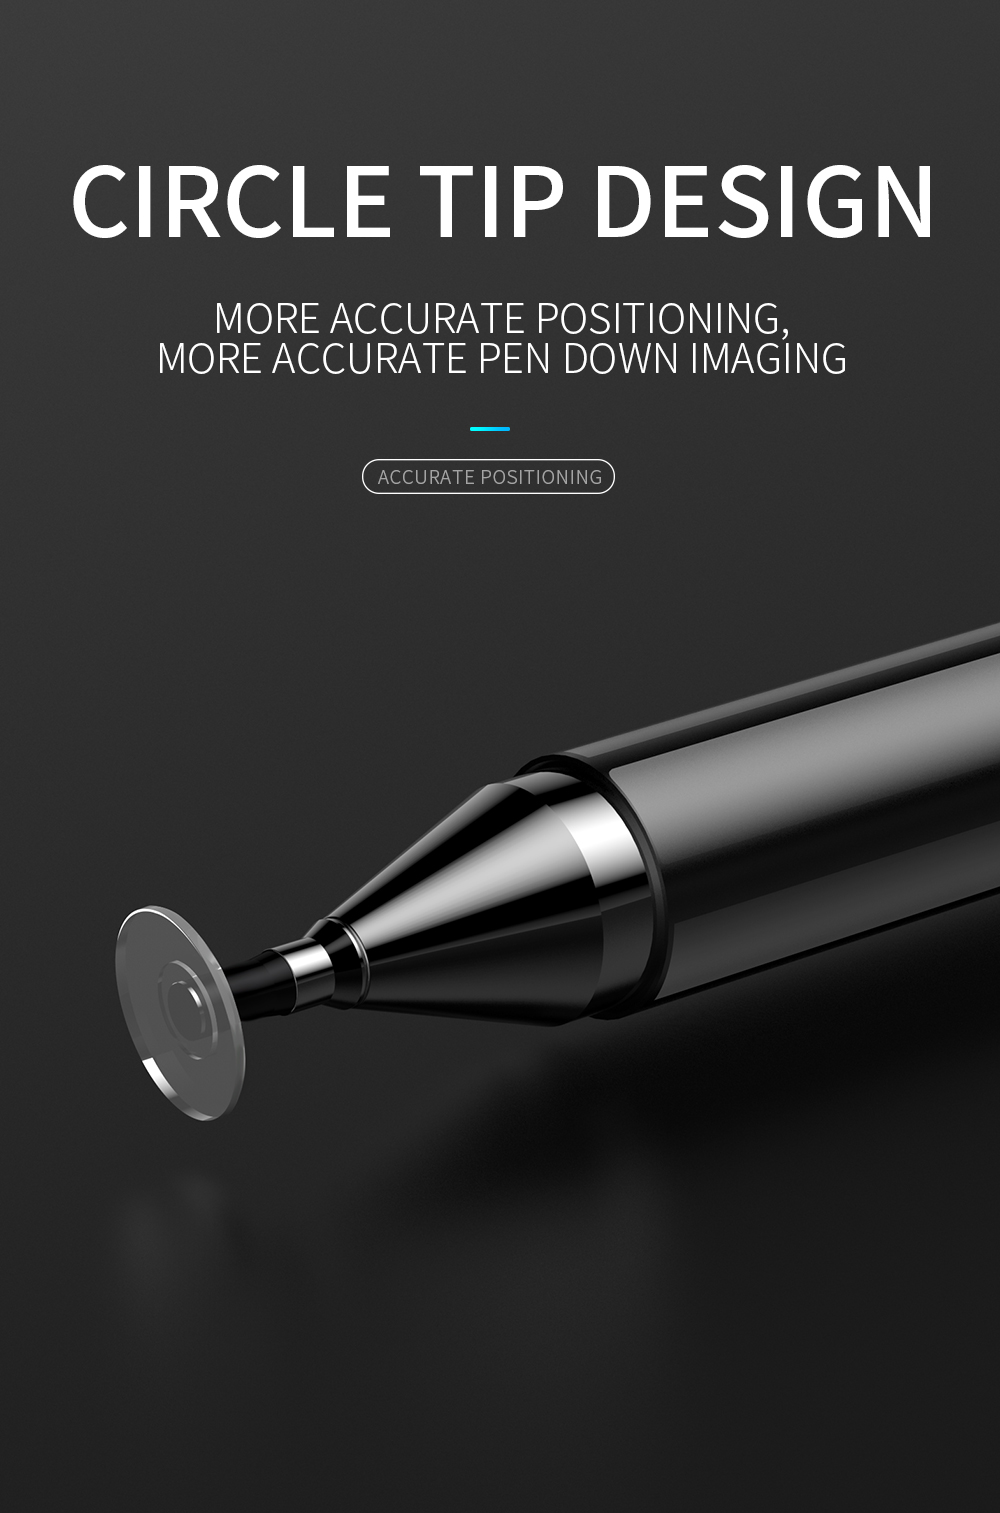 Joyroom-JR-BP560-Passive-Capacitive-Touch-Screen-Stylus-Pen-For-iOS-Android-Windows-Smart-Phone-Tabl-1591275-4